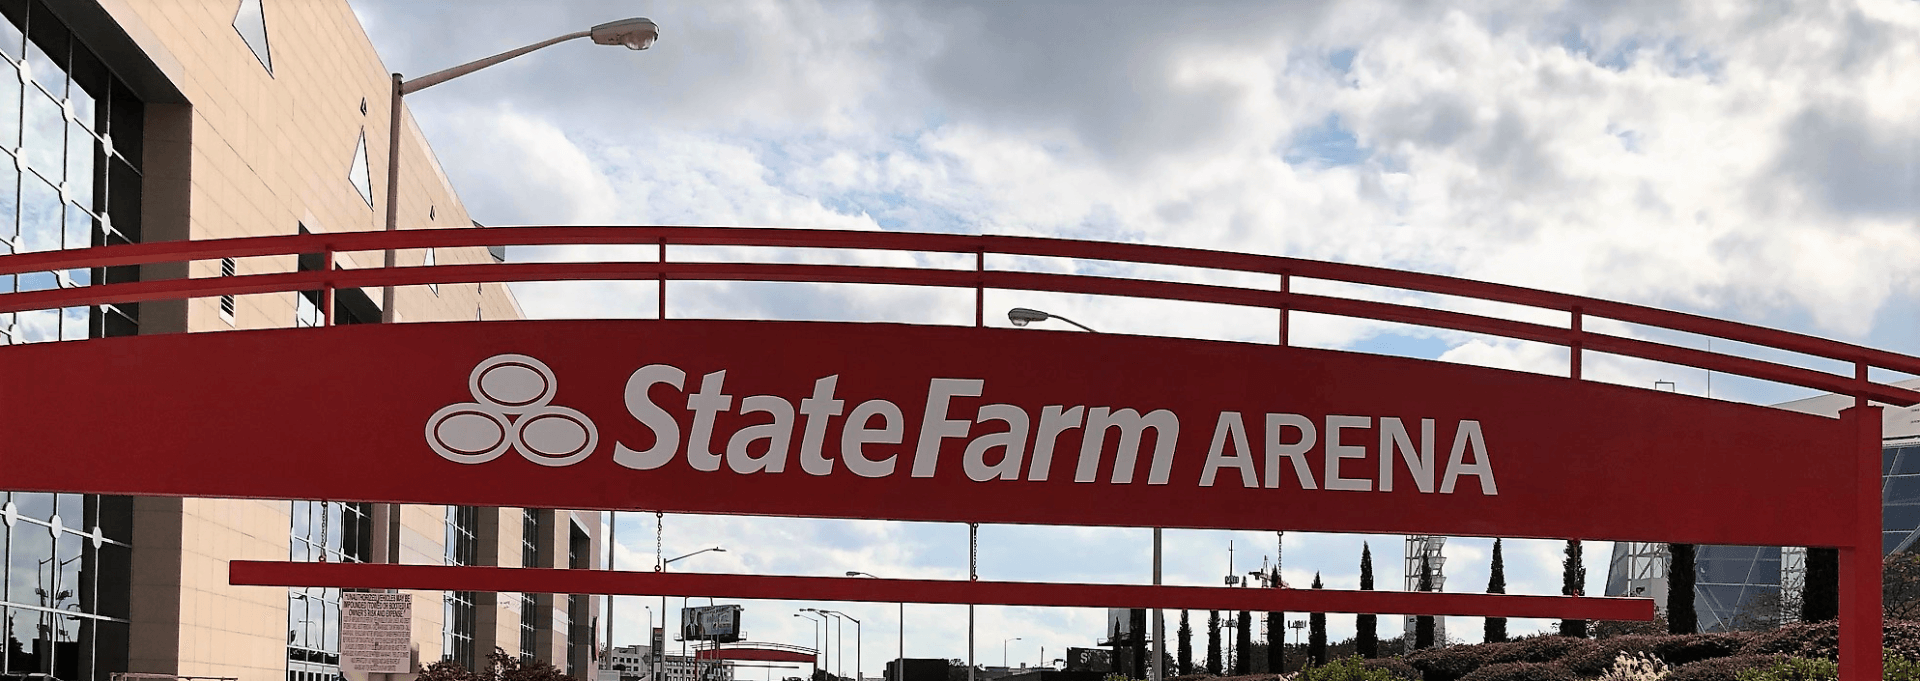 State Farm Arena Sign